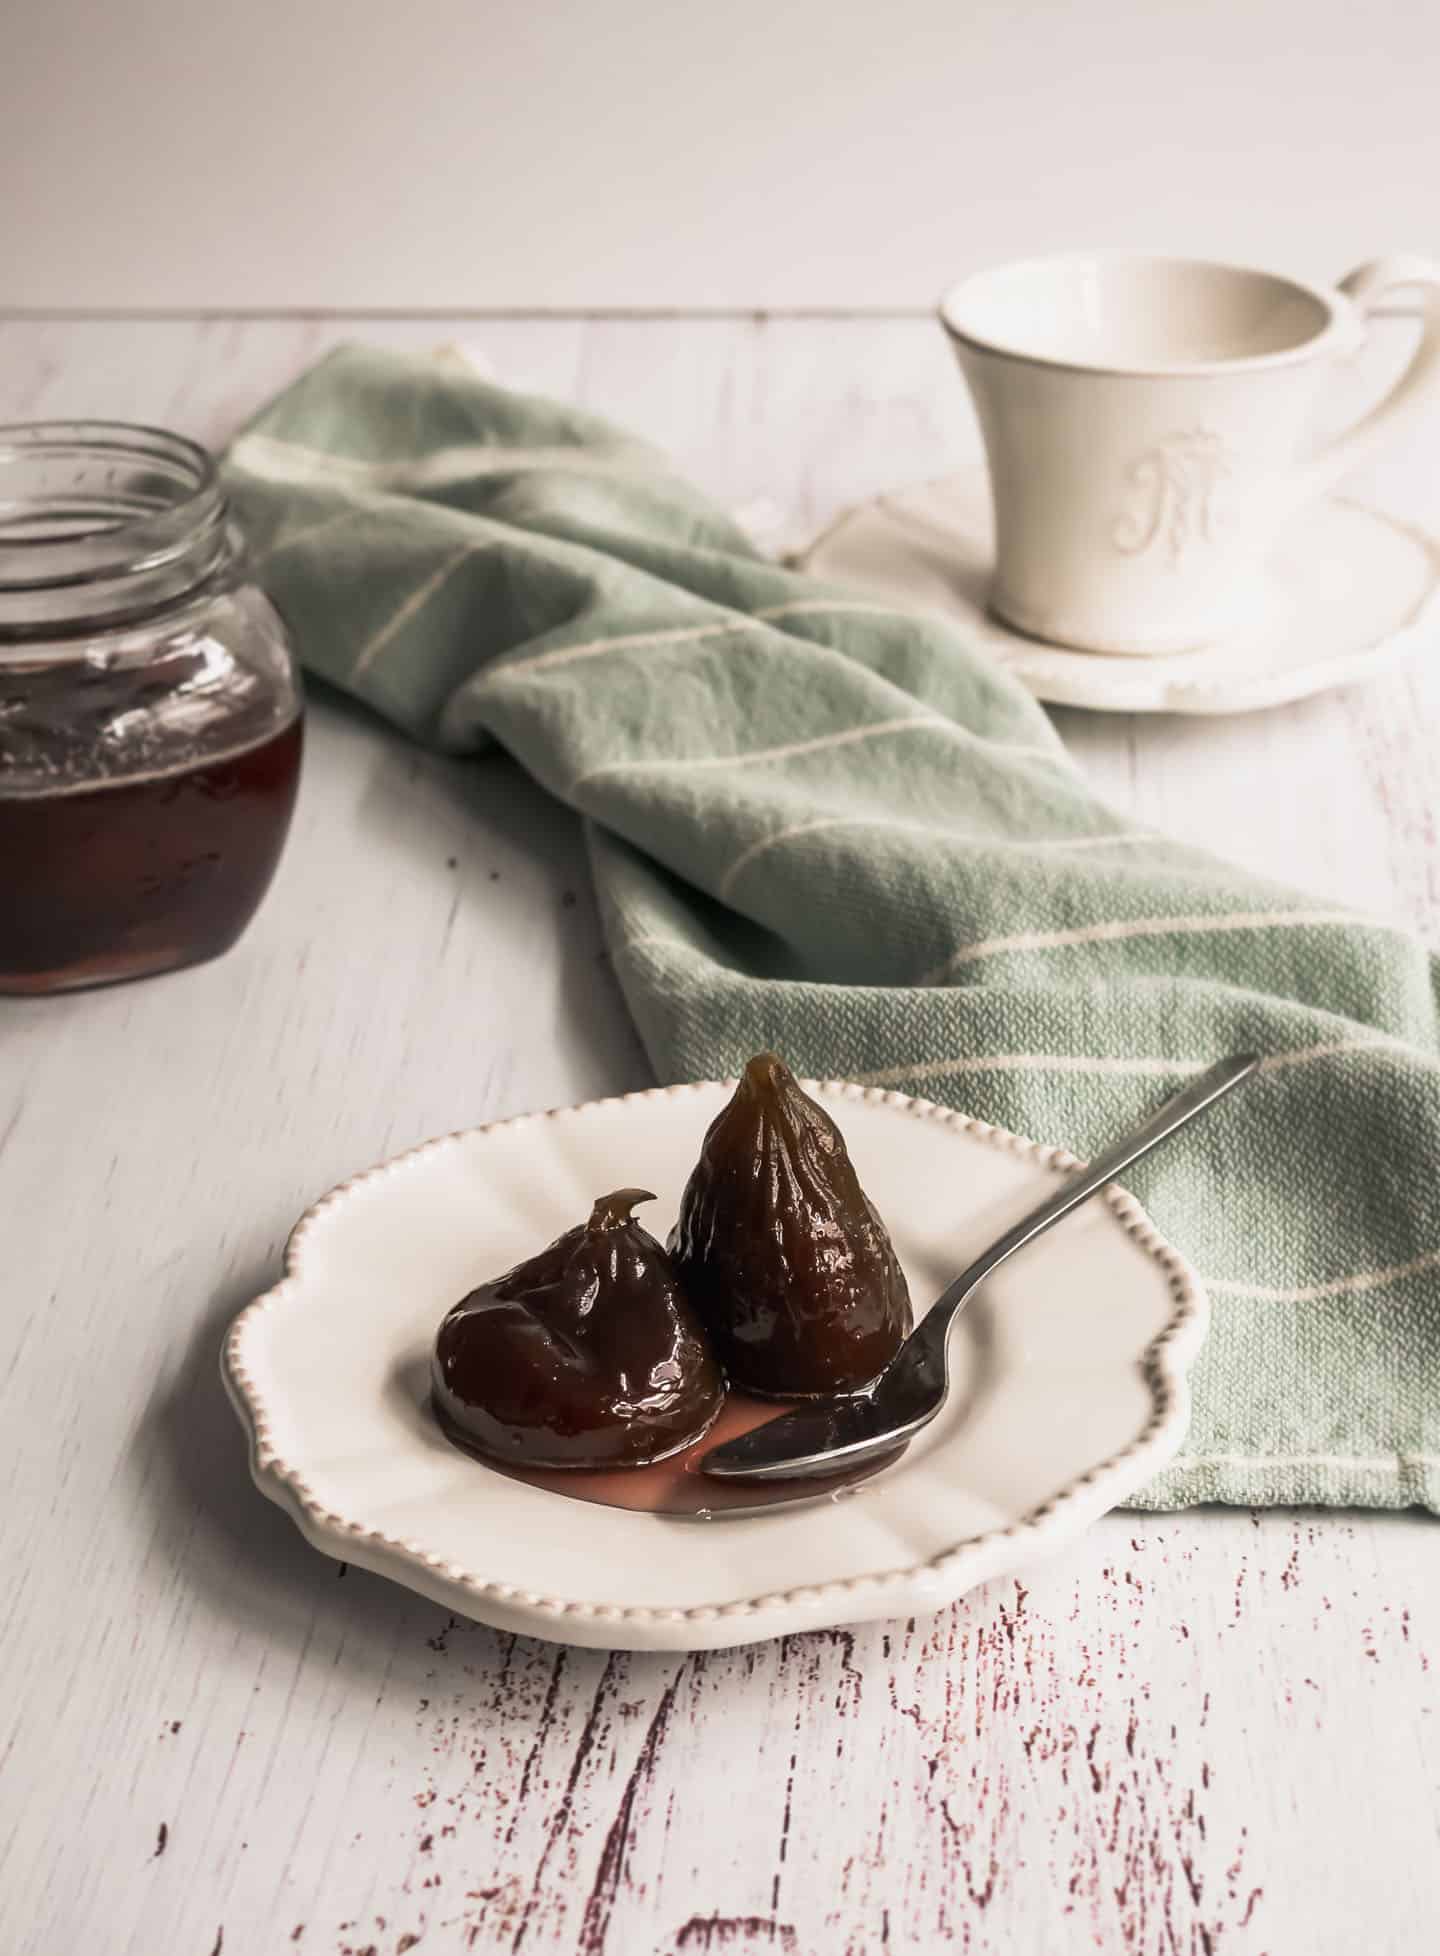 Figs in Syrup in front of a open jar with figs and a tea cup